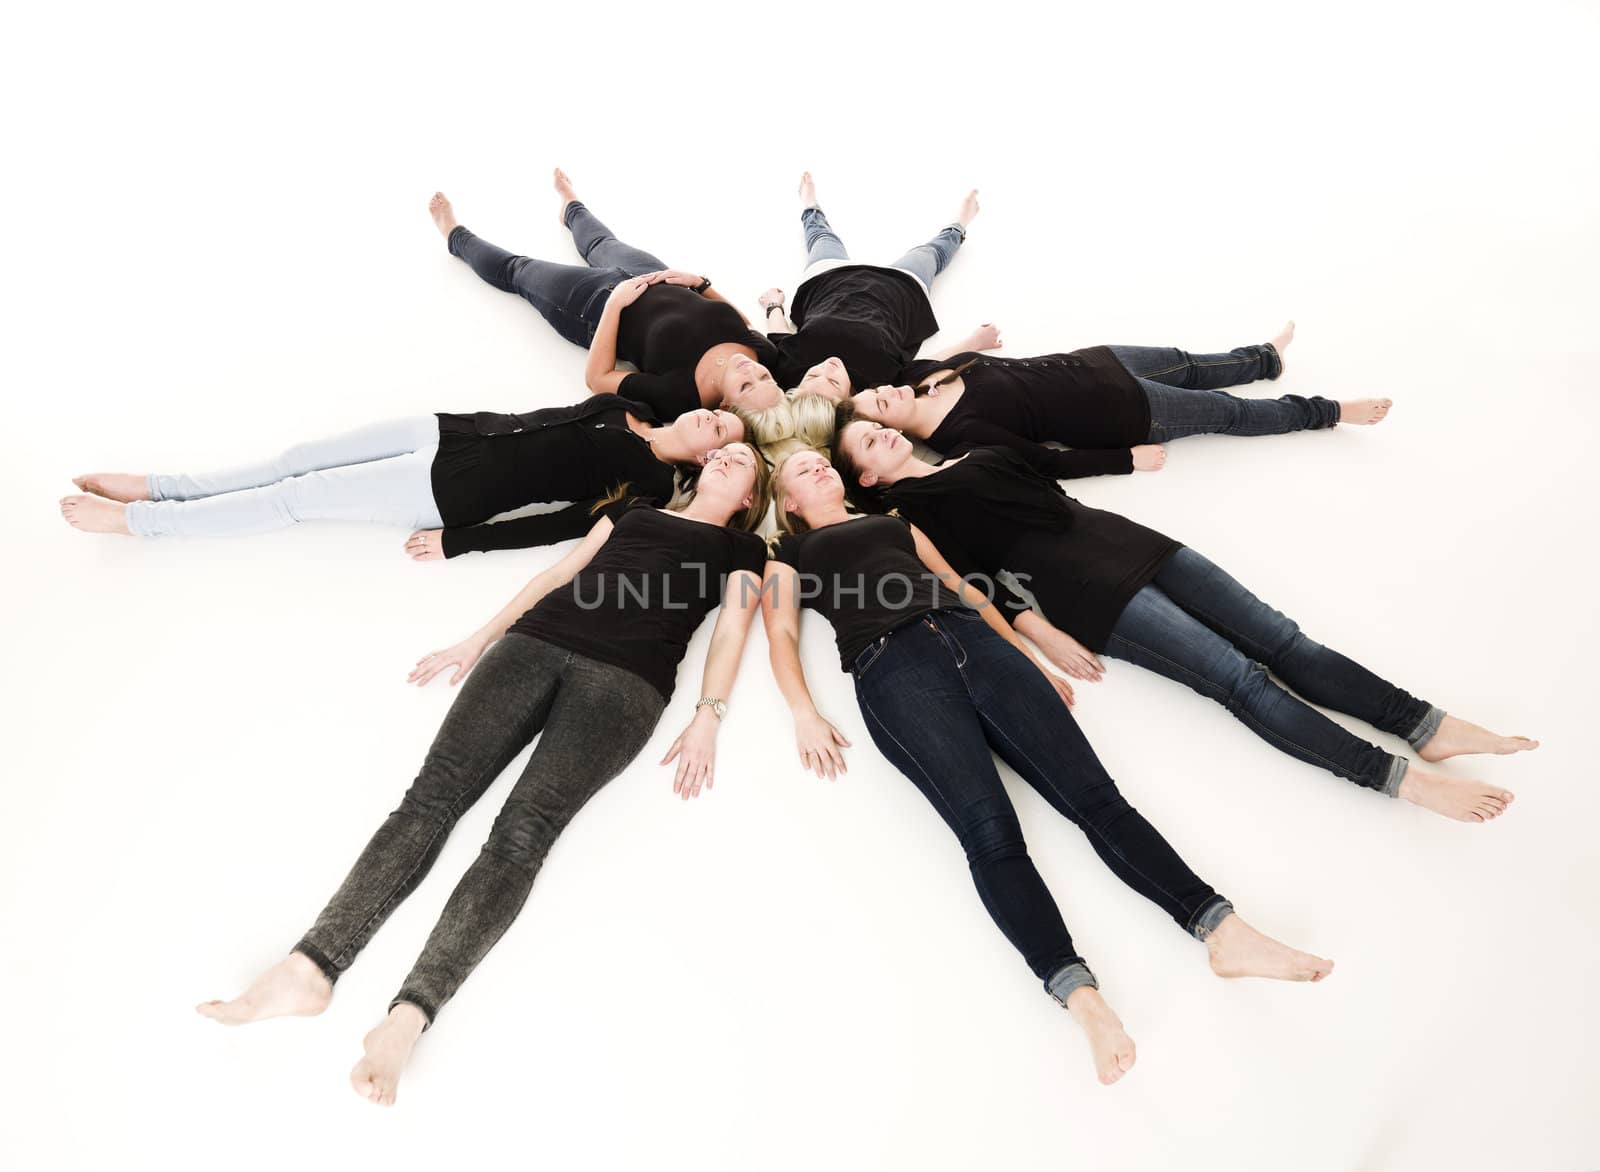 Group of Young Women lieing in a circle on white background